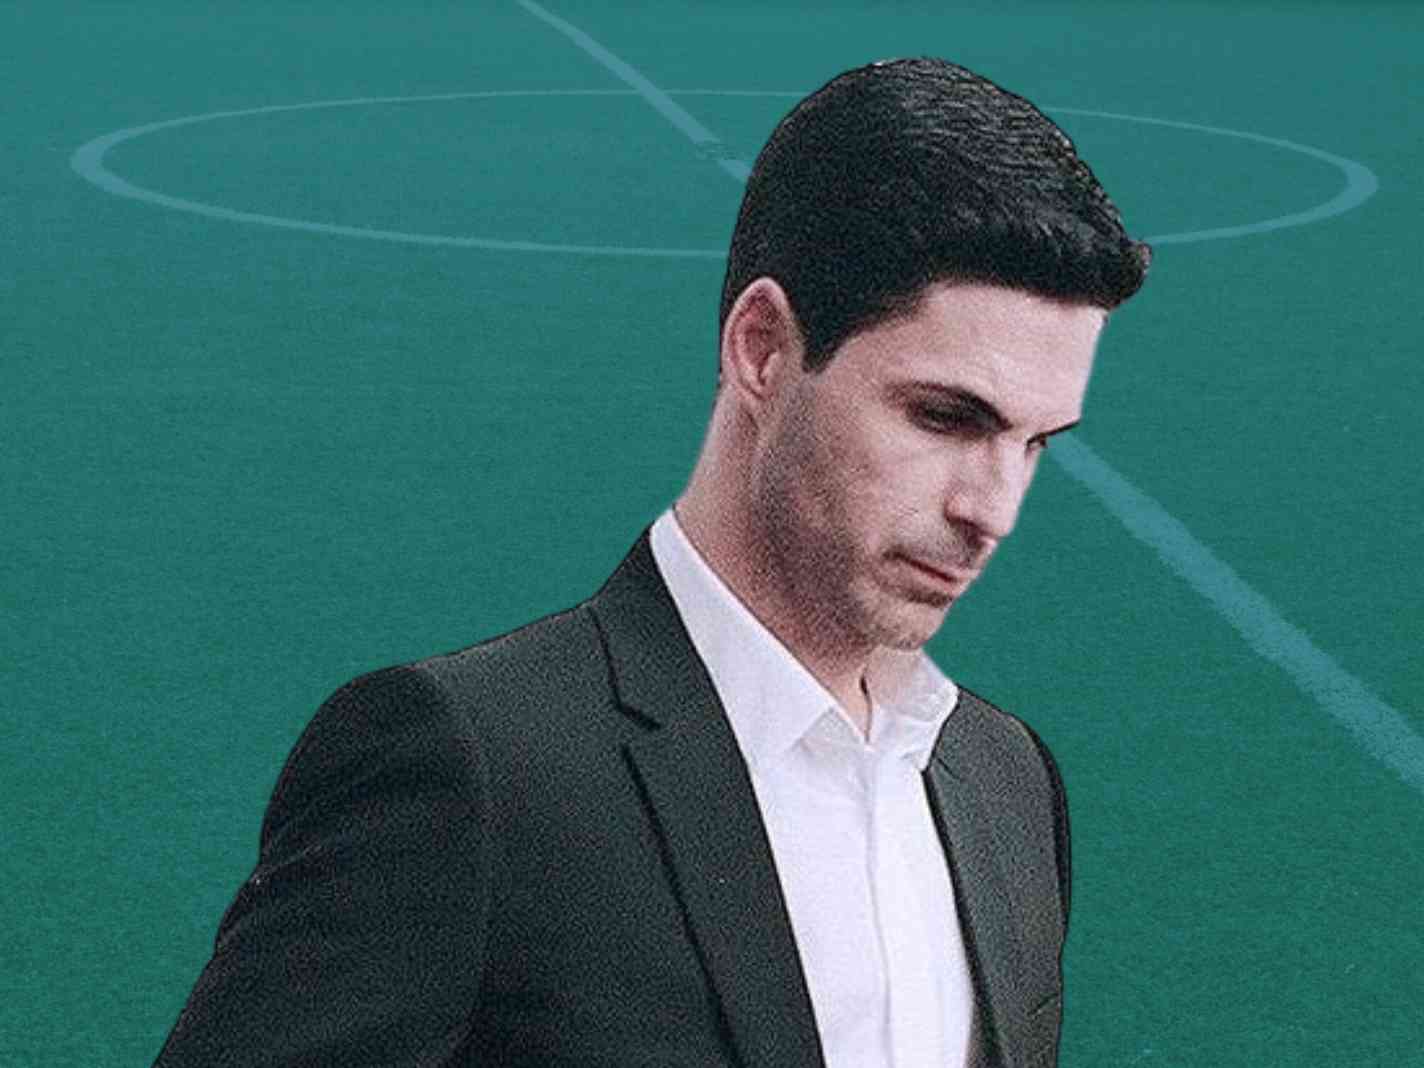 Eyeing CEO role at Zara? Mikel Arteta has fans swooning over new Telegraph fashion shoot